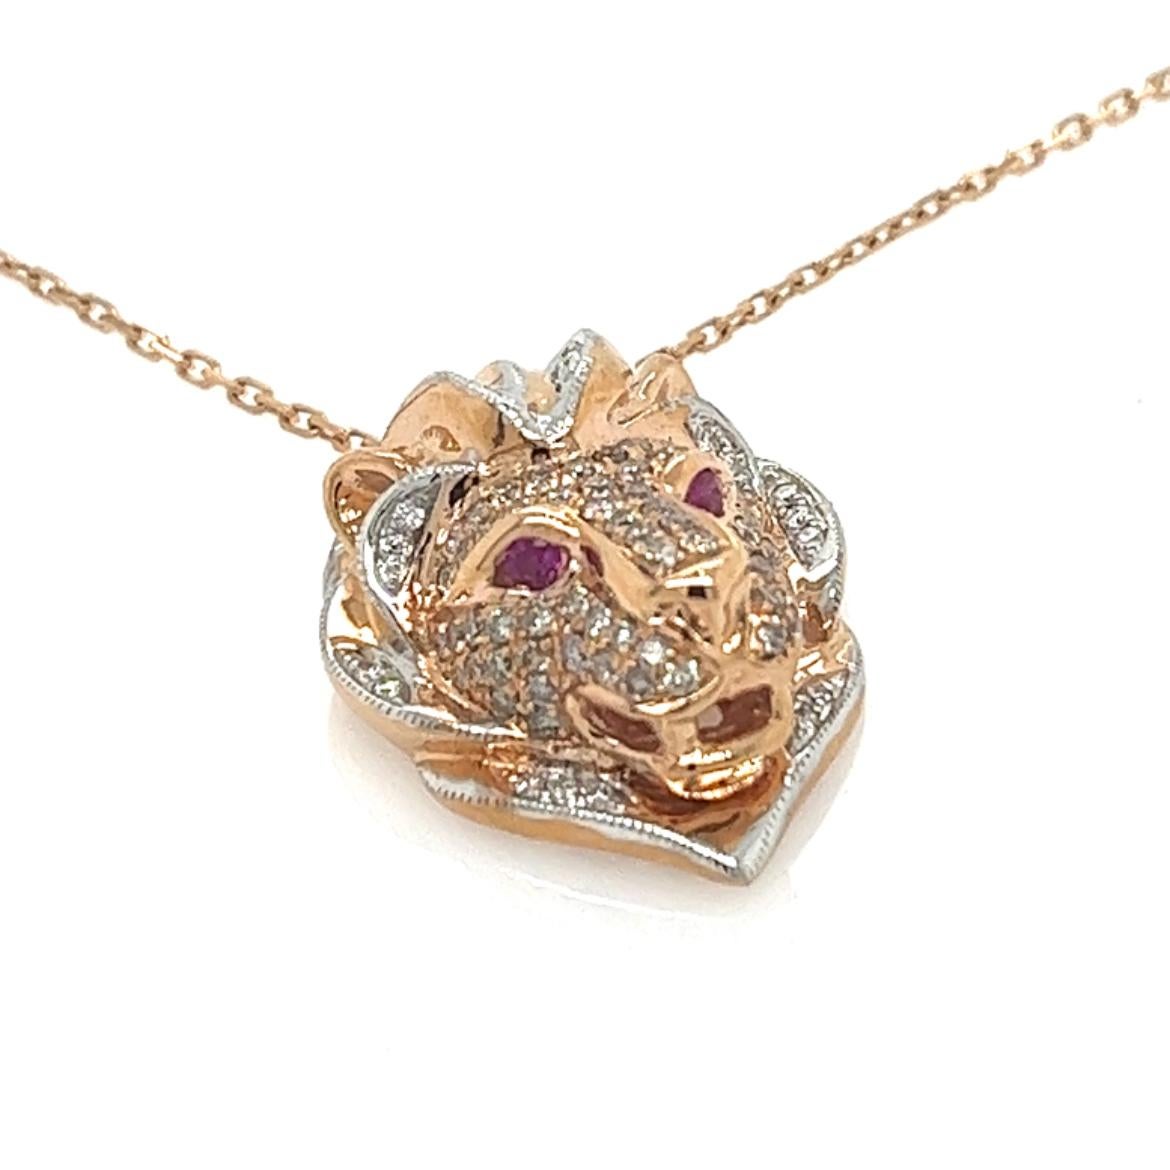 18K Rose Gold Brown Diamond Lion Necklace with Rubies

69 Brown Diamonds - 0.58 CT
23 Diamonds - 0.15 CT
2 Rubies - 0.06 CT
18K Rose Gold - 10.39 GM

Roaring with regal elegance, this captivating necklace is a masterful fusion of nature's fiercest